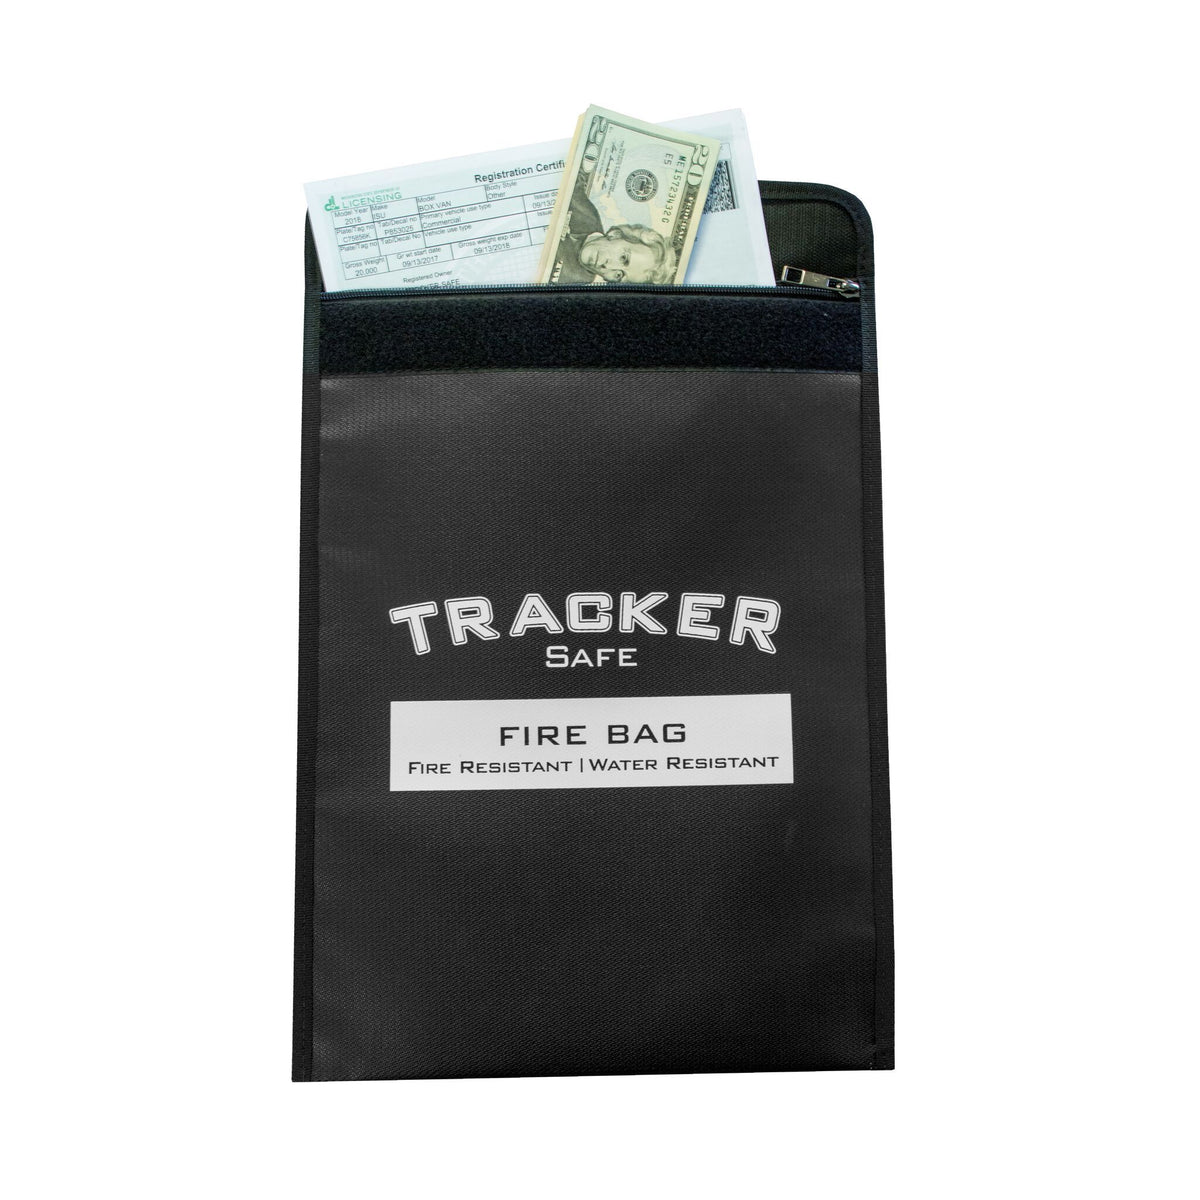 Tracker FB1511 Fire &amp; Water Resistant Bag with Cash &amp; Papers Sticking Out 2